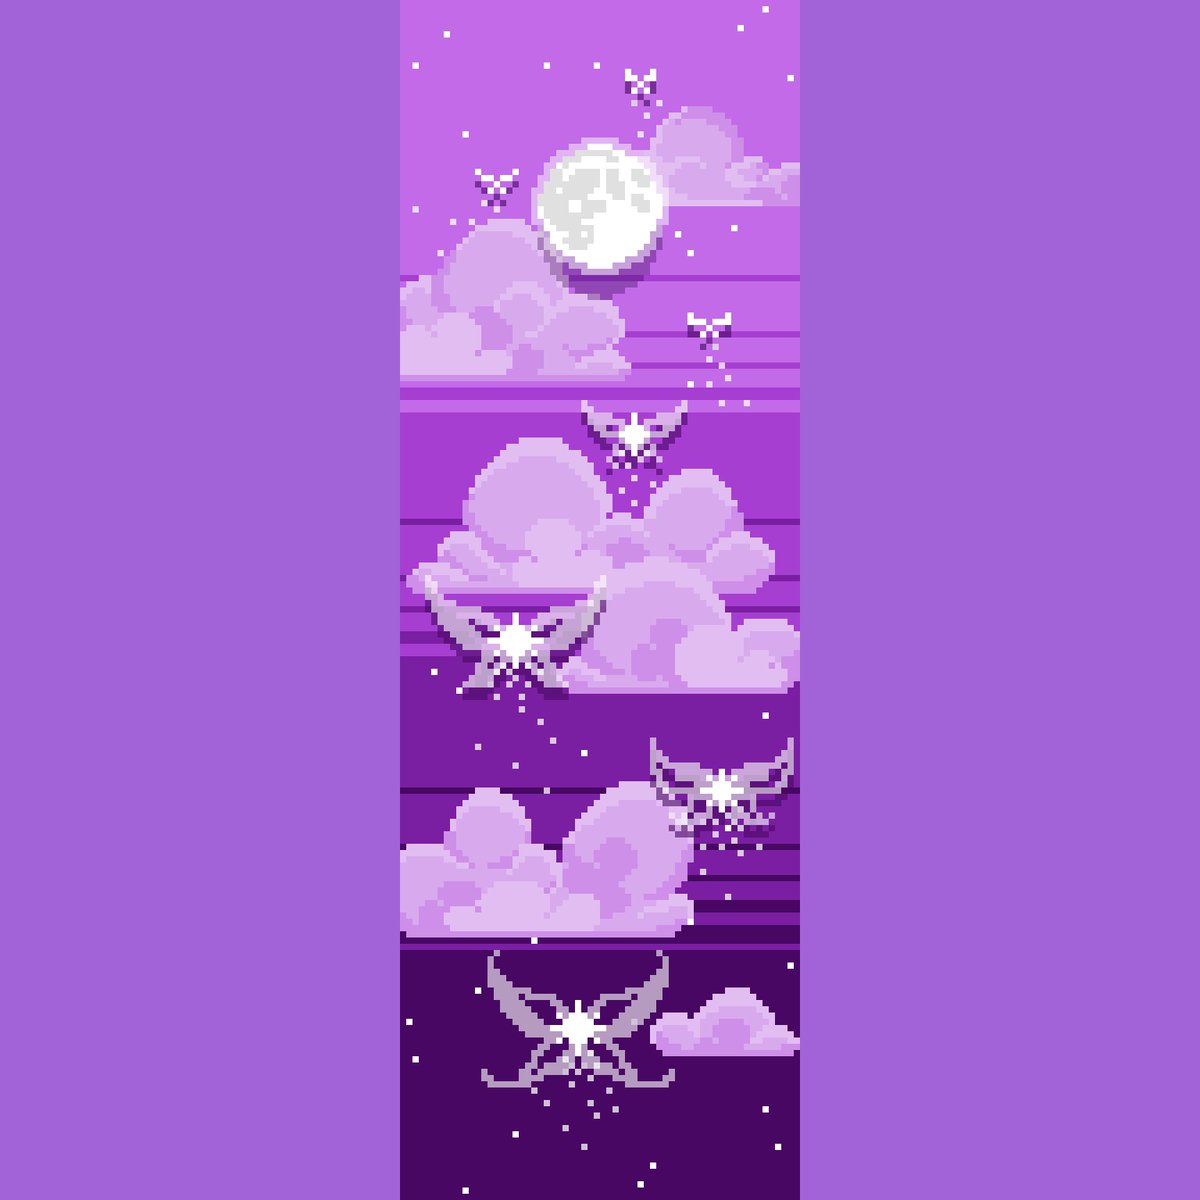 Had to redo the concept multiple times to the point of pain and suffering but finally managed to get it right!

#pixelart #aseprite #cuteart #magicart #cute #cutepixelart #bookmark #bookmarkart #kawaiiart #stars #pixelartwork #nightskyart #bookaccessories #butterflyart #skyart